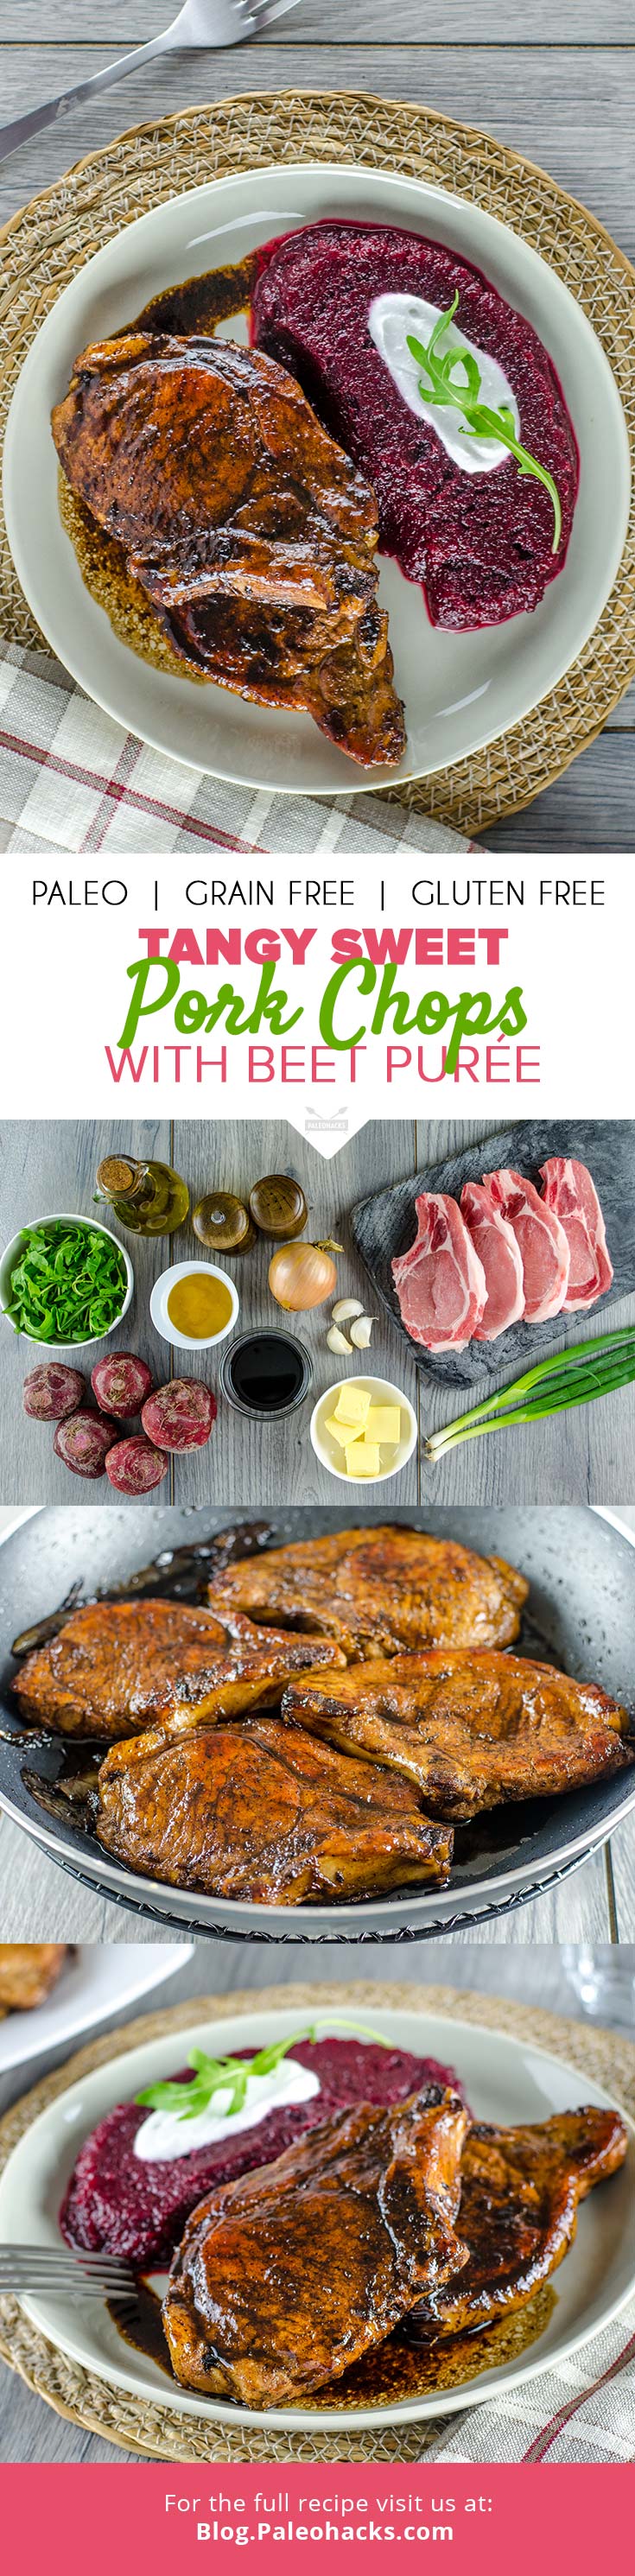 Jazz up your weekend with these tangy sweet pork chops, which are seared to perfection and served alongside a vibrant, smooth beet puree.